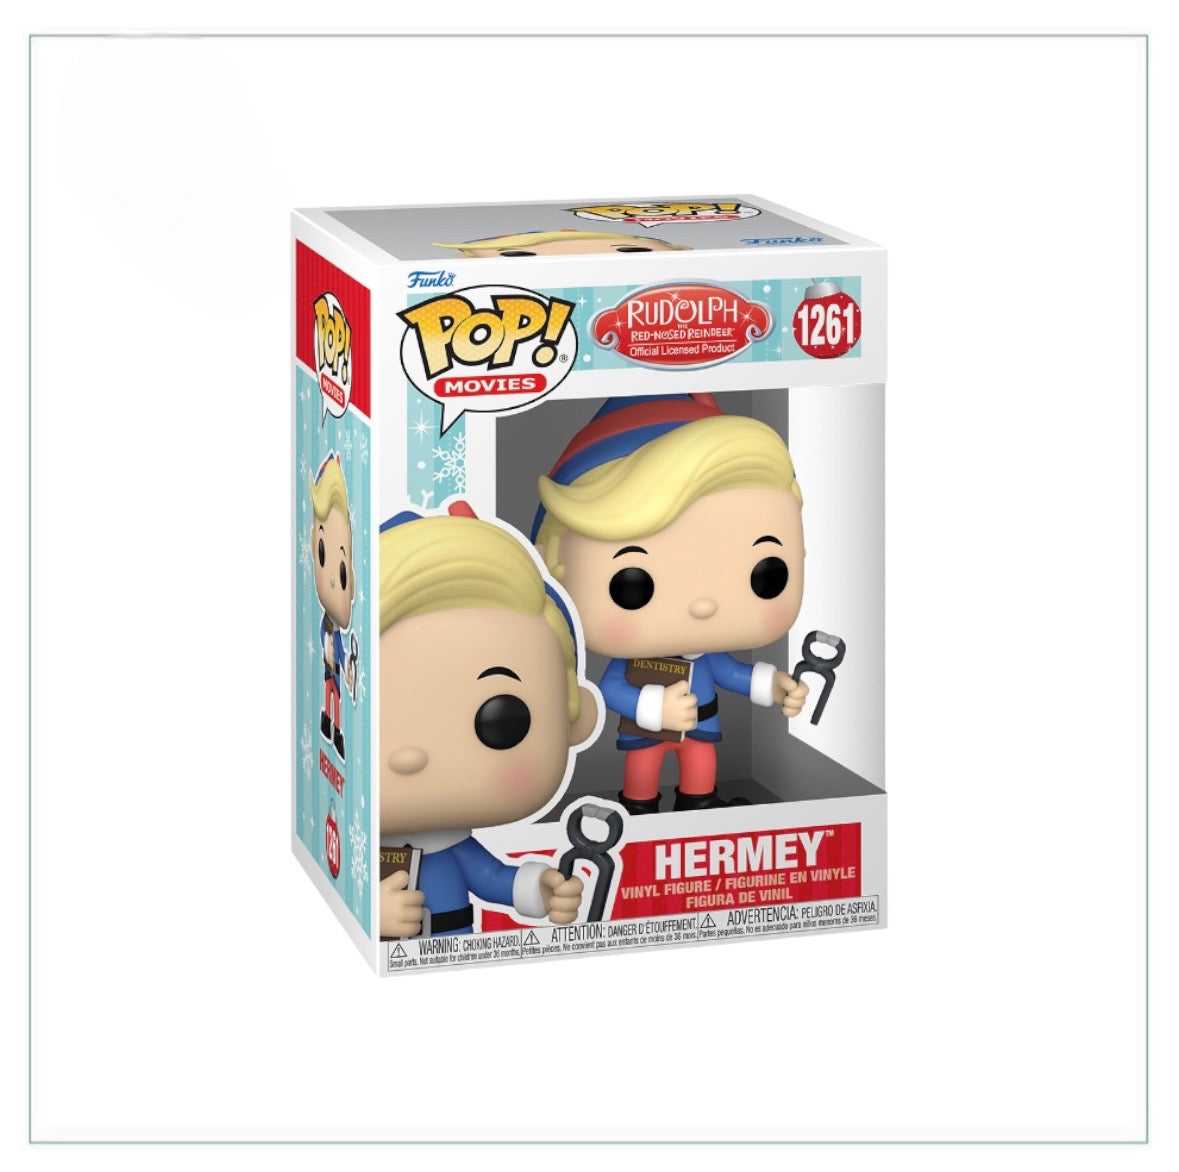 Hermey #1261 Funko Pop! - Rudolph the Red-Nosed Reindeer - PREORDER